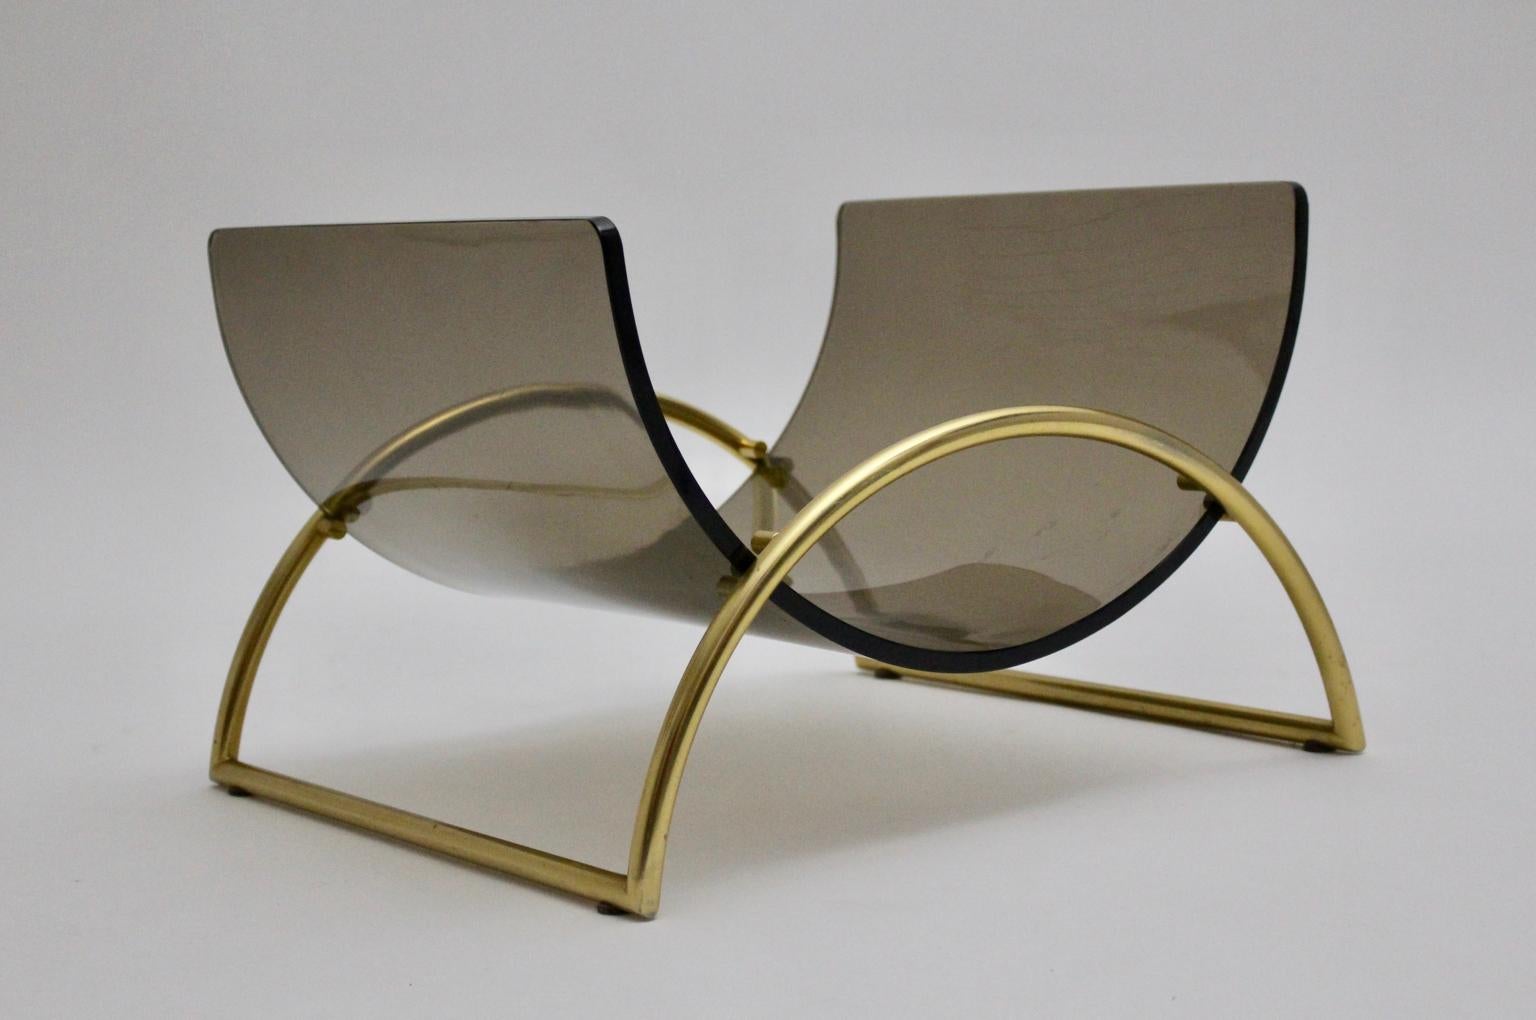 This presented vintage magazine rack named Lira L1 was designed by Pierangelo Gallotti and manufactured by Gallotti & Radice, Italy.
The elegant magazine rack features a gilded aluminium base and a smoked curved glass.
The condition is very good